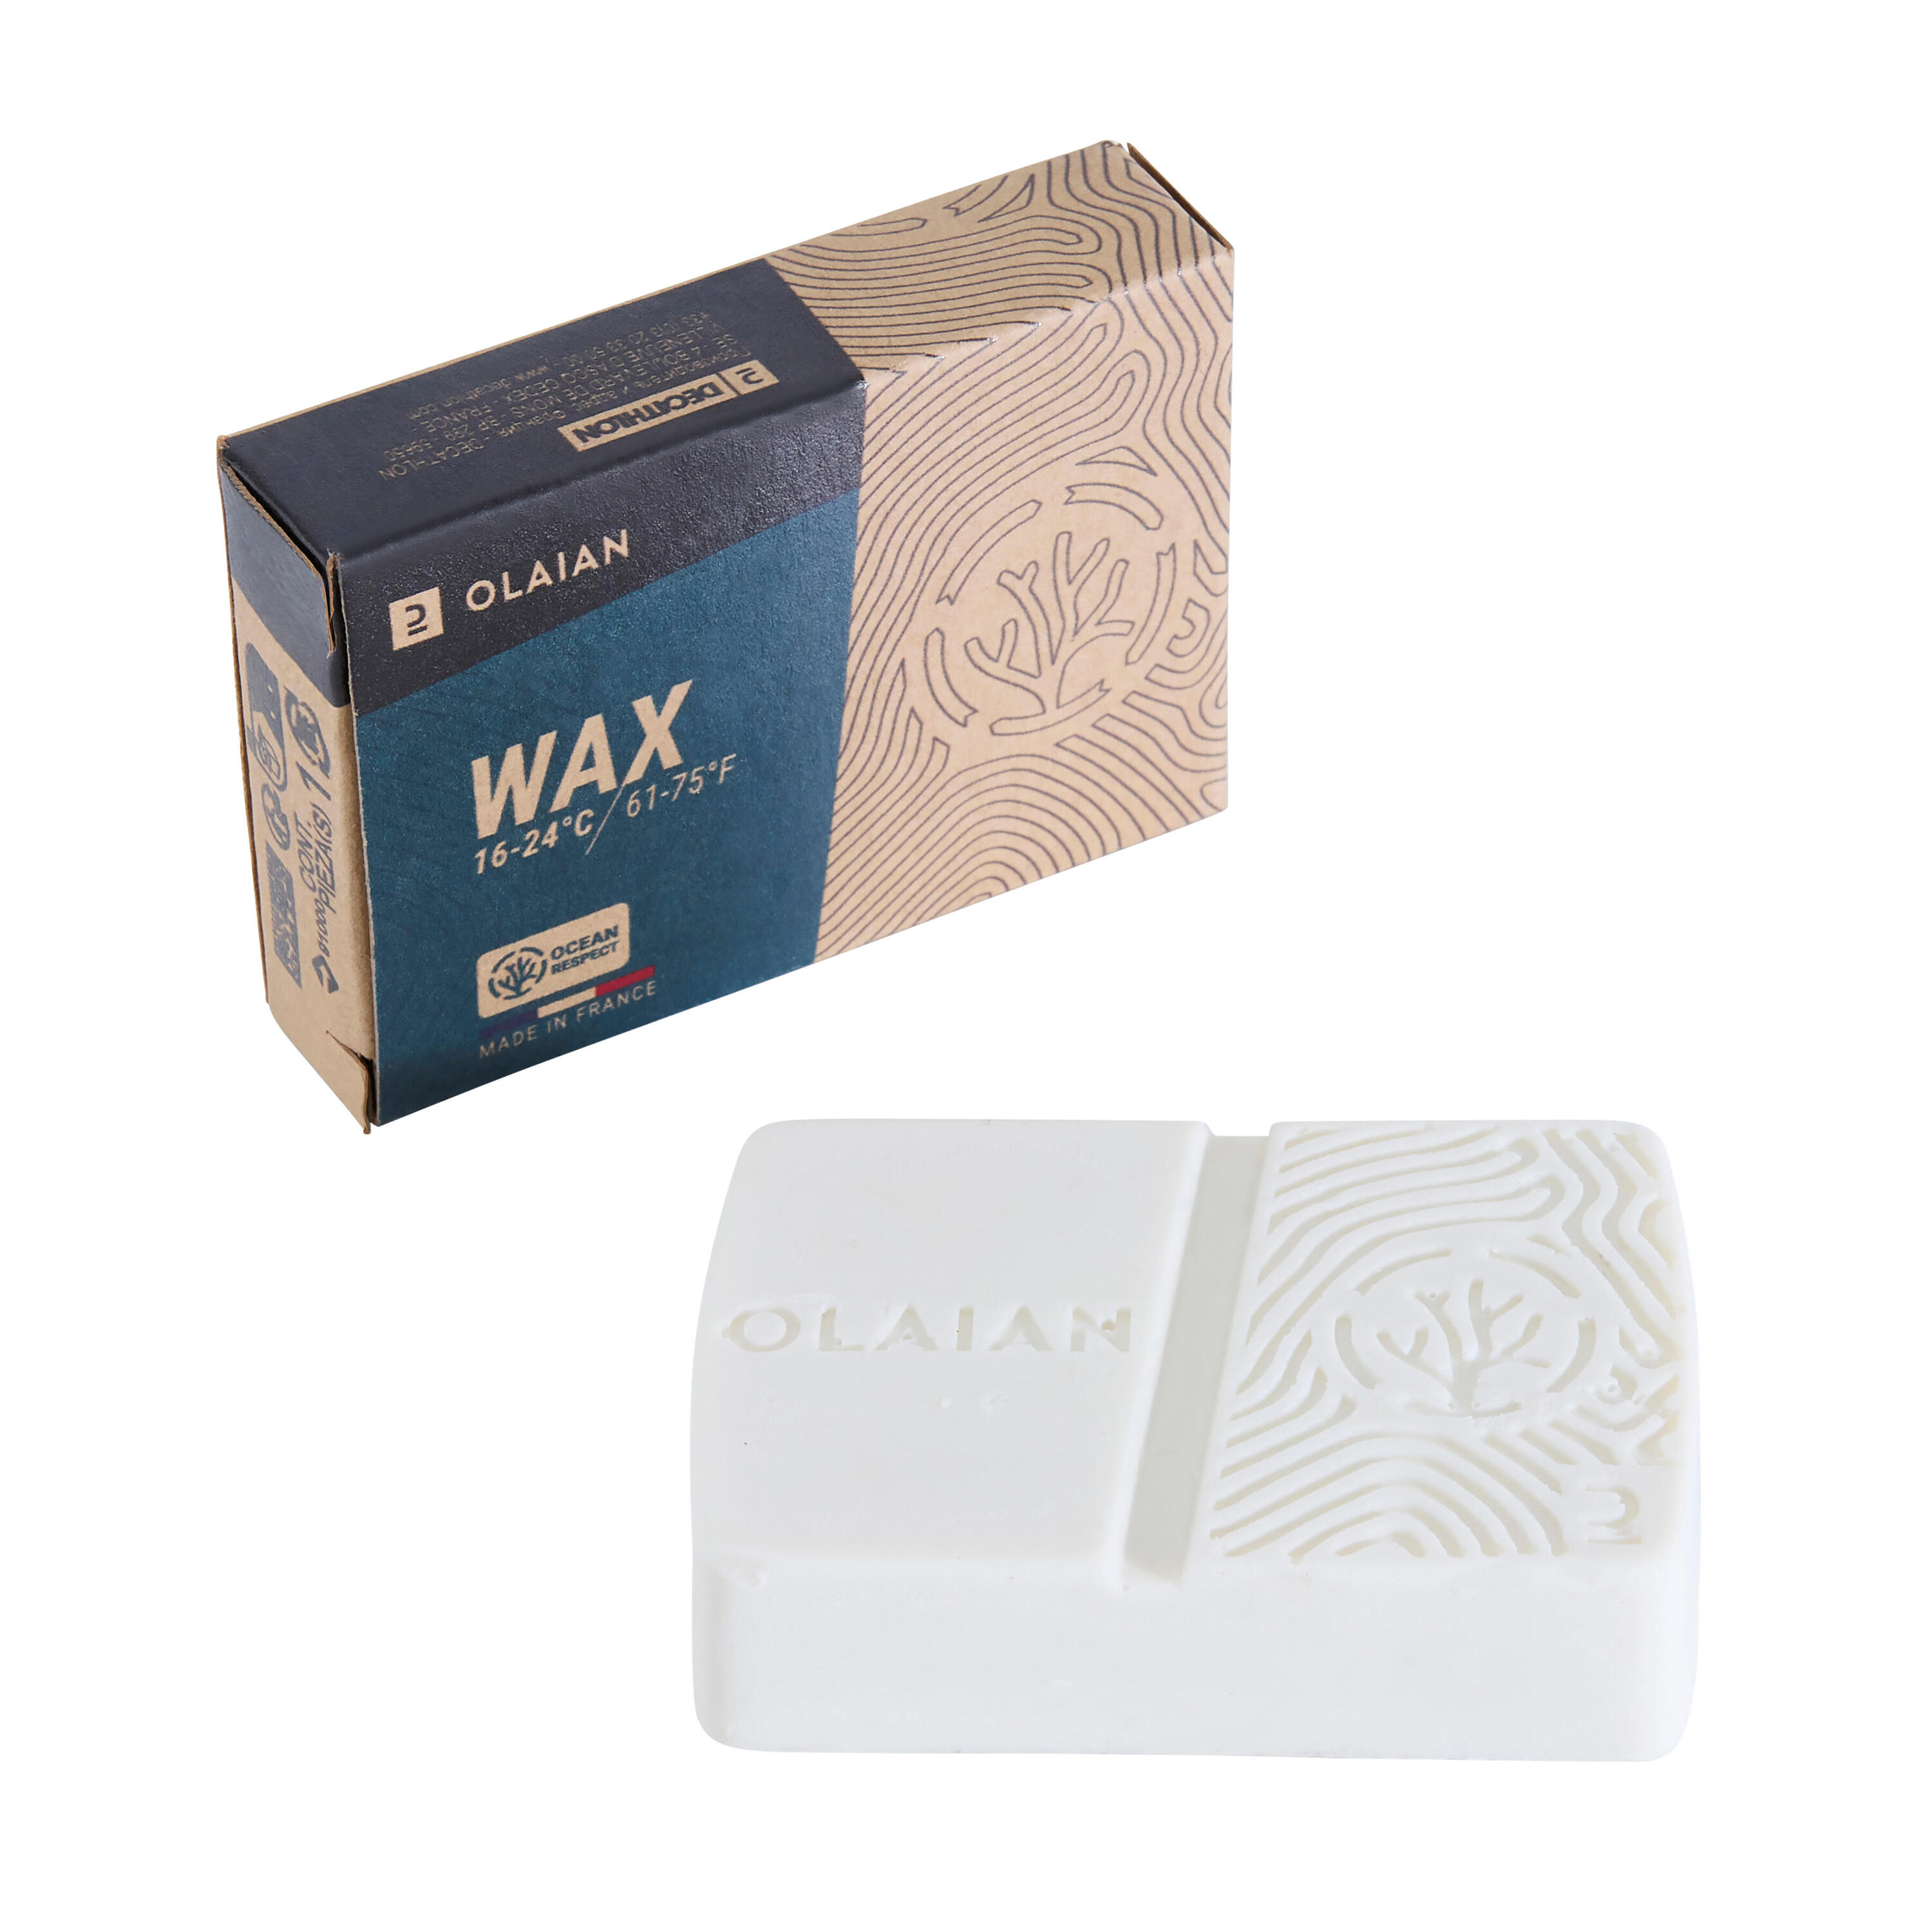 Surf wax of natural origin for temperate water from 16 to 24 °C. 2/6